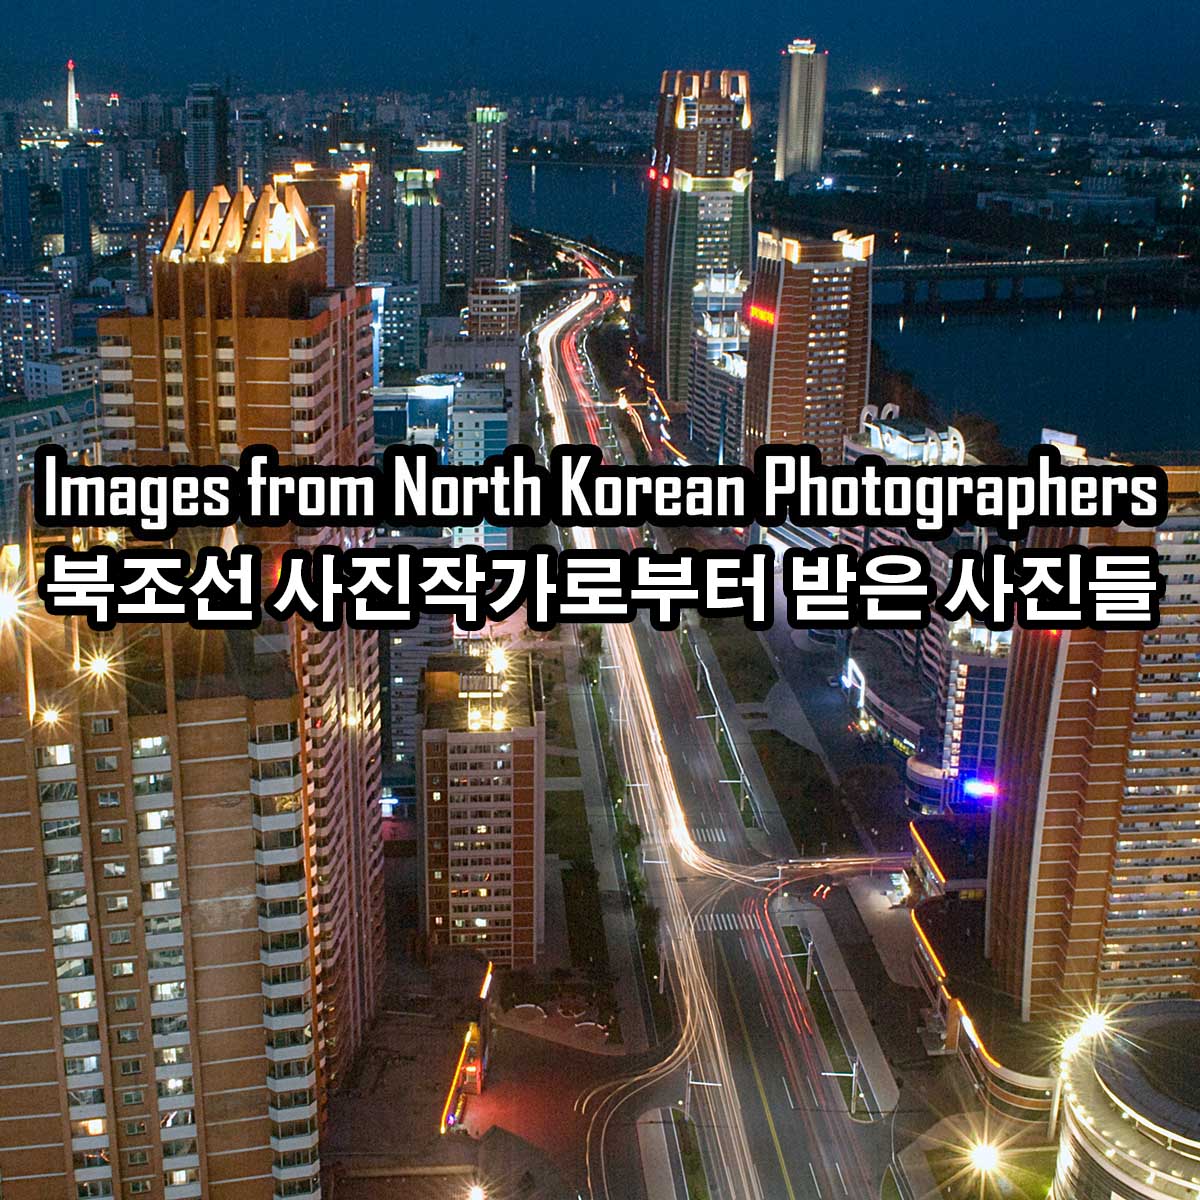 Images from North Korean Photographers